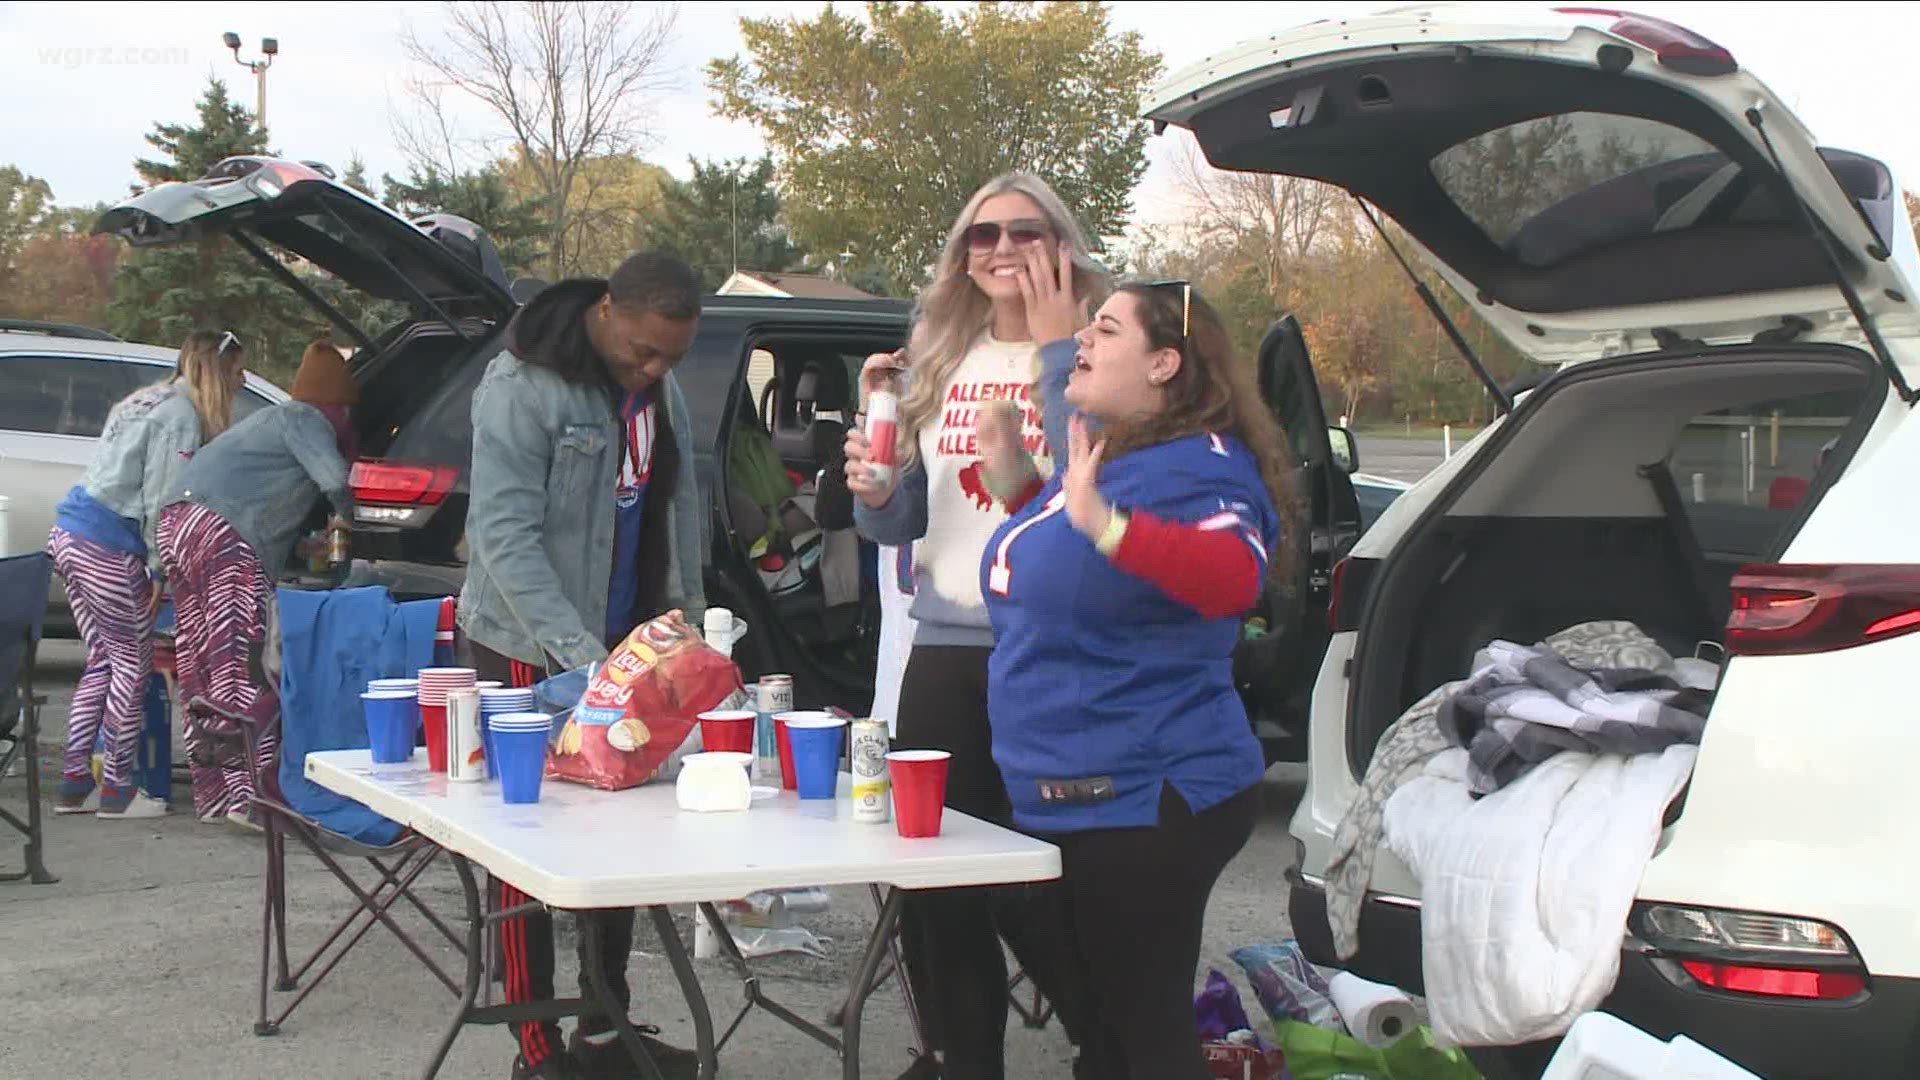 Some Bills fans did get to do a little tailgating today at the Transit Drive-In tonight. Fans tell us they're glad to cheer on their team in public.